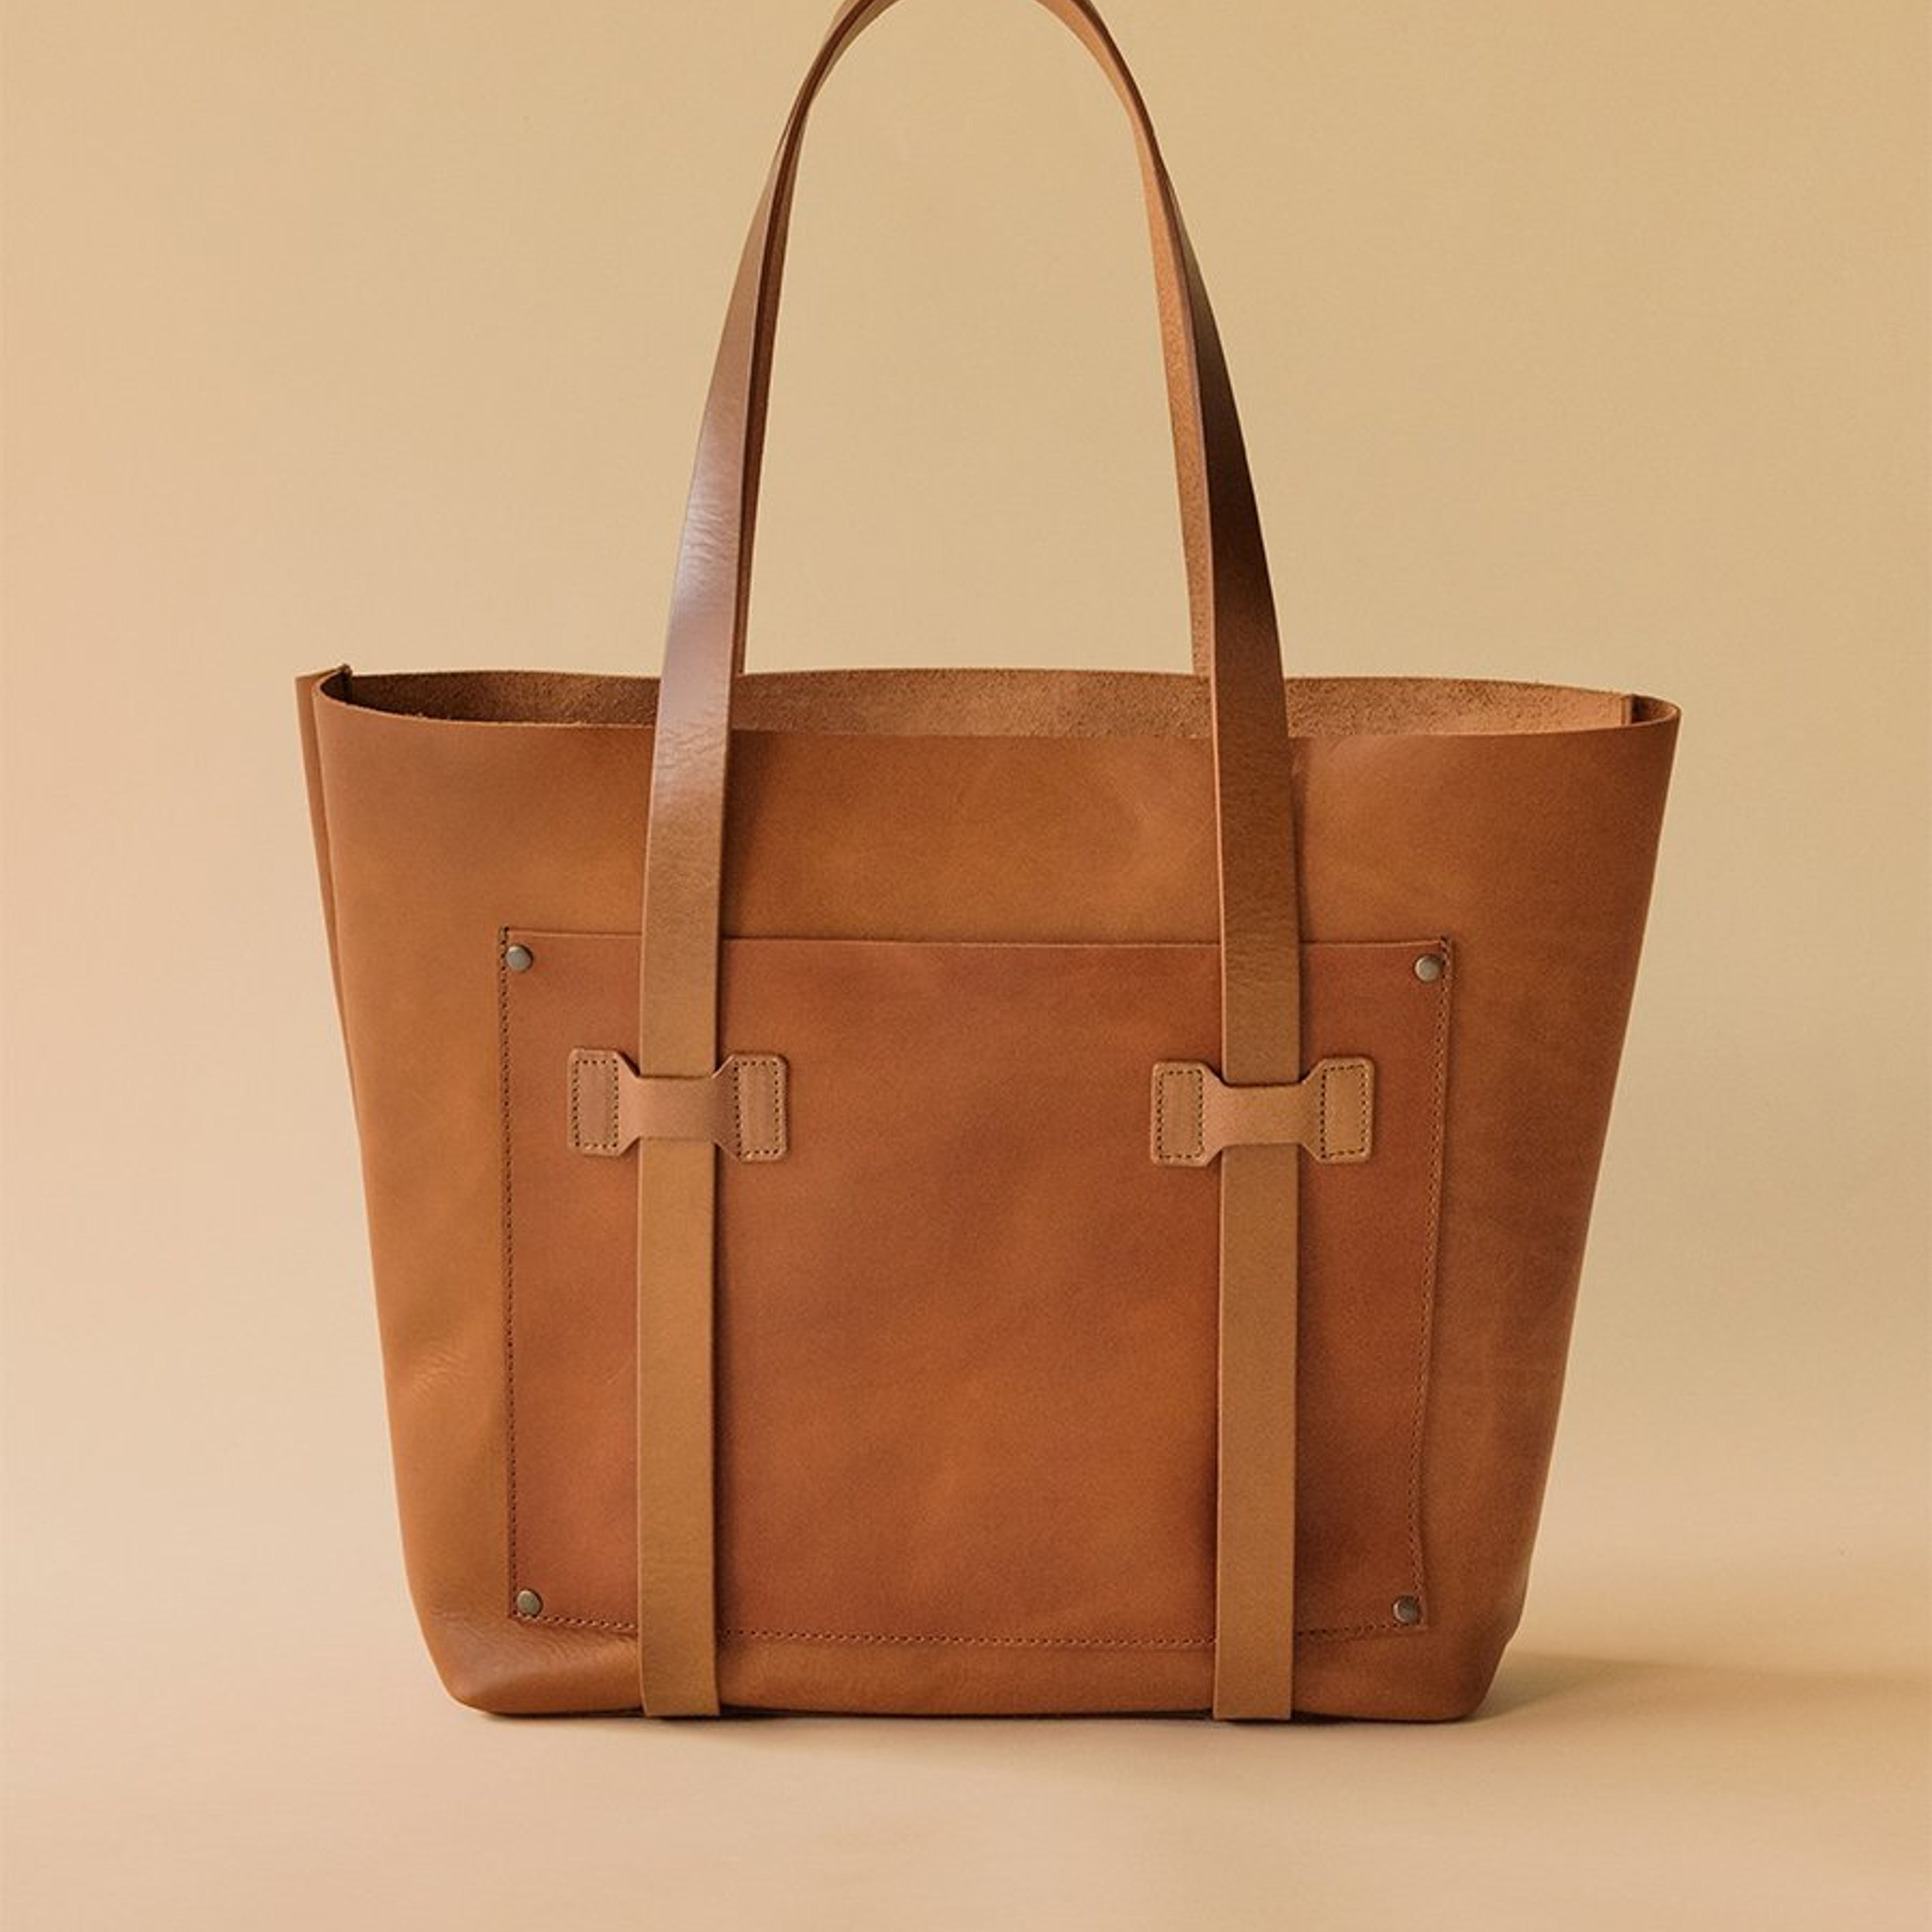 The Cargo Tote Bag